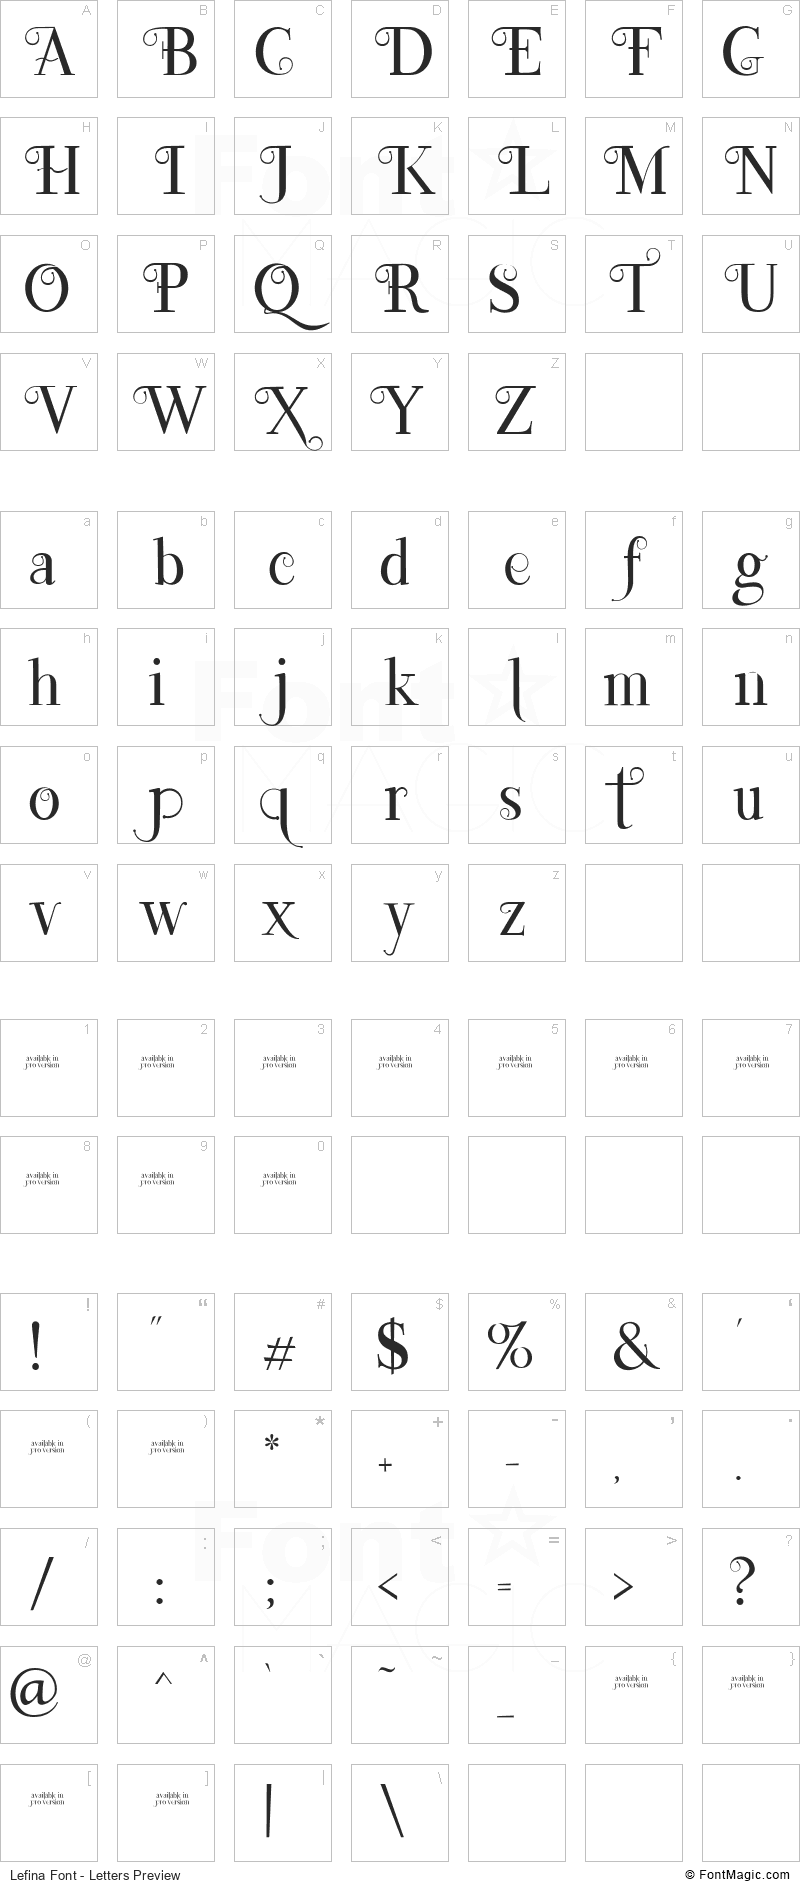 Lefina Font - All Latters Preview Chart